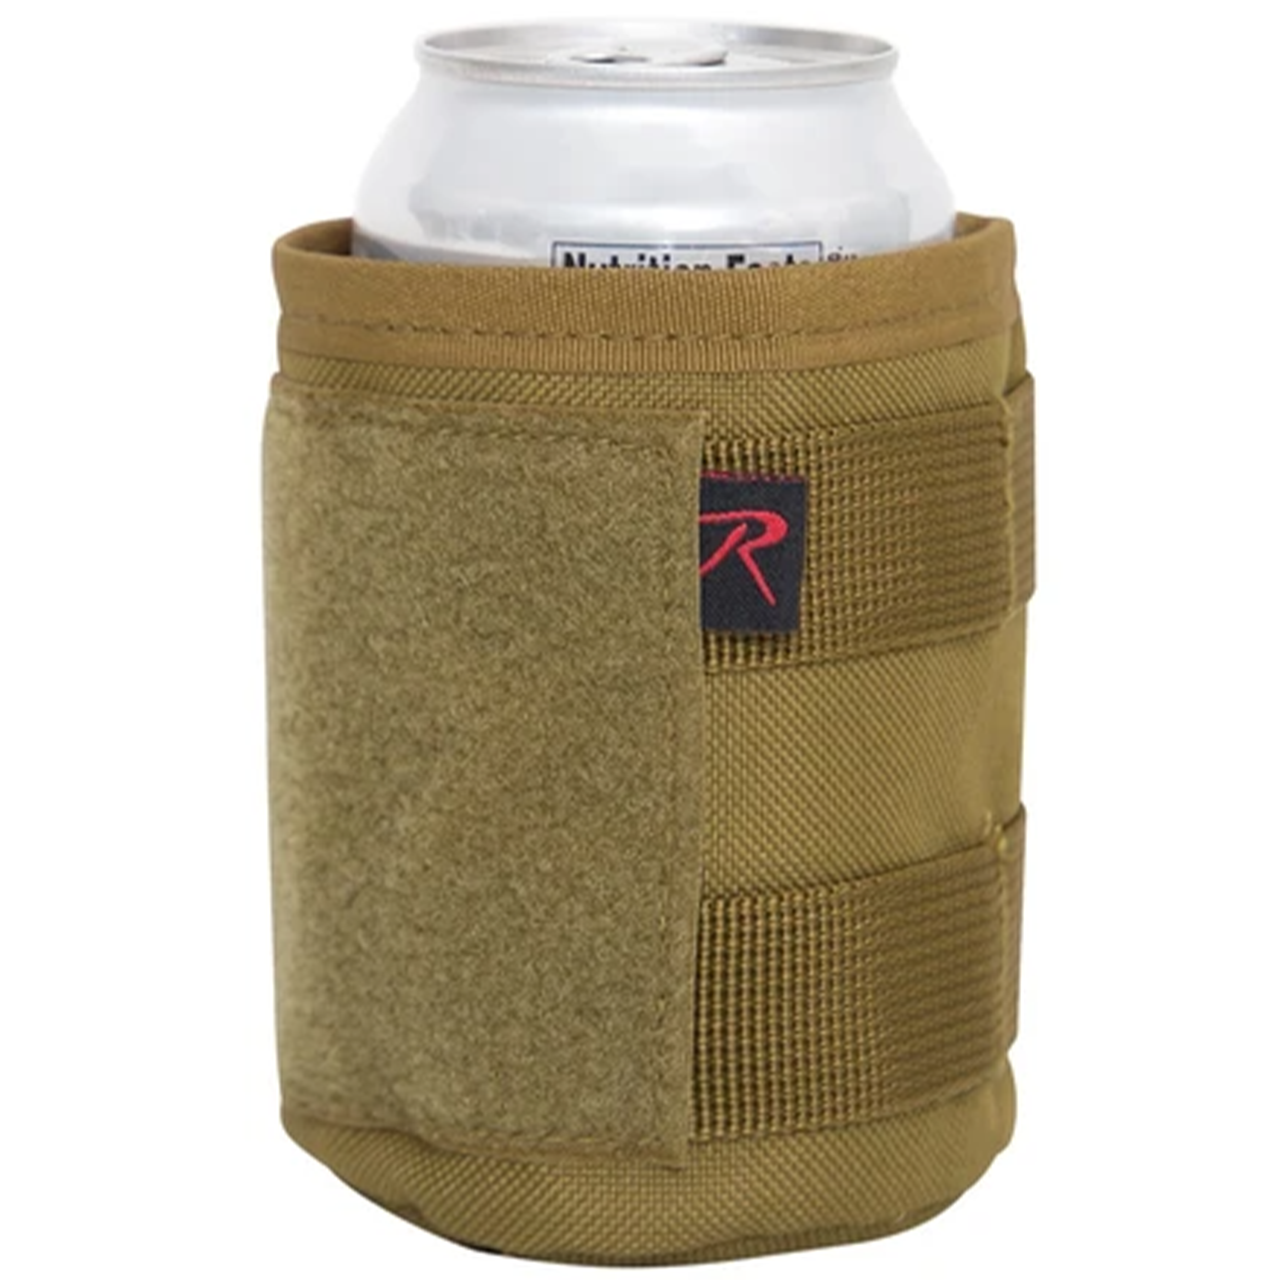 Rothco Tactical Insulated Beverage Holder